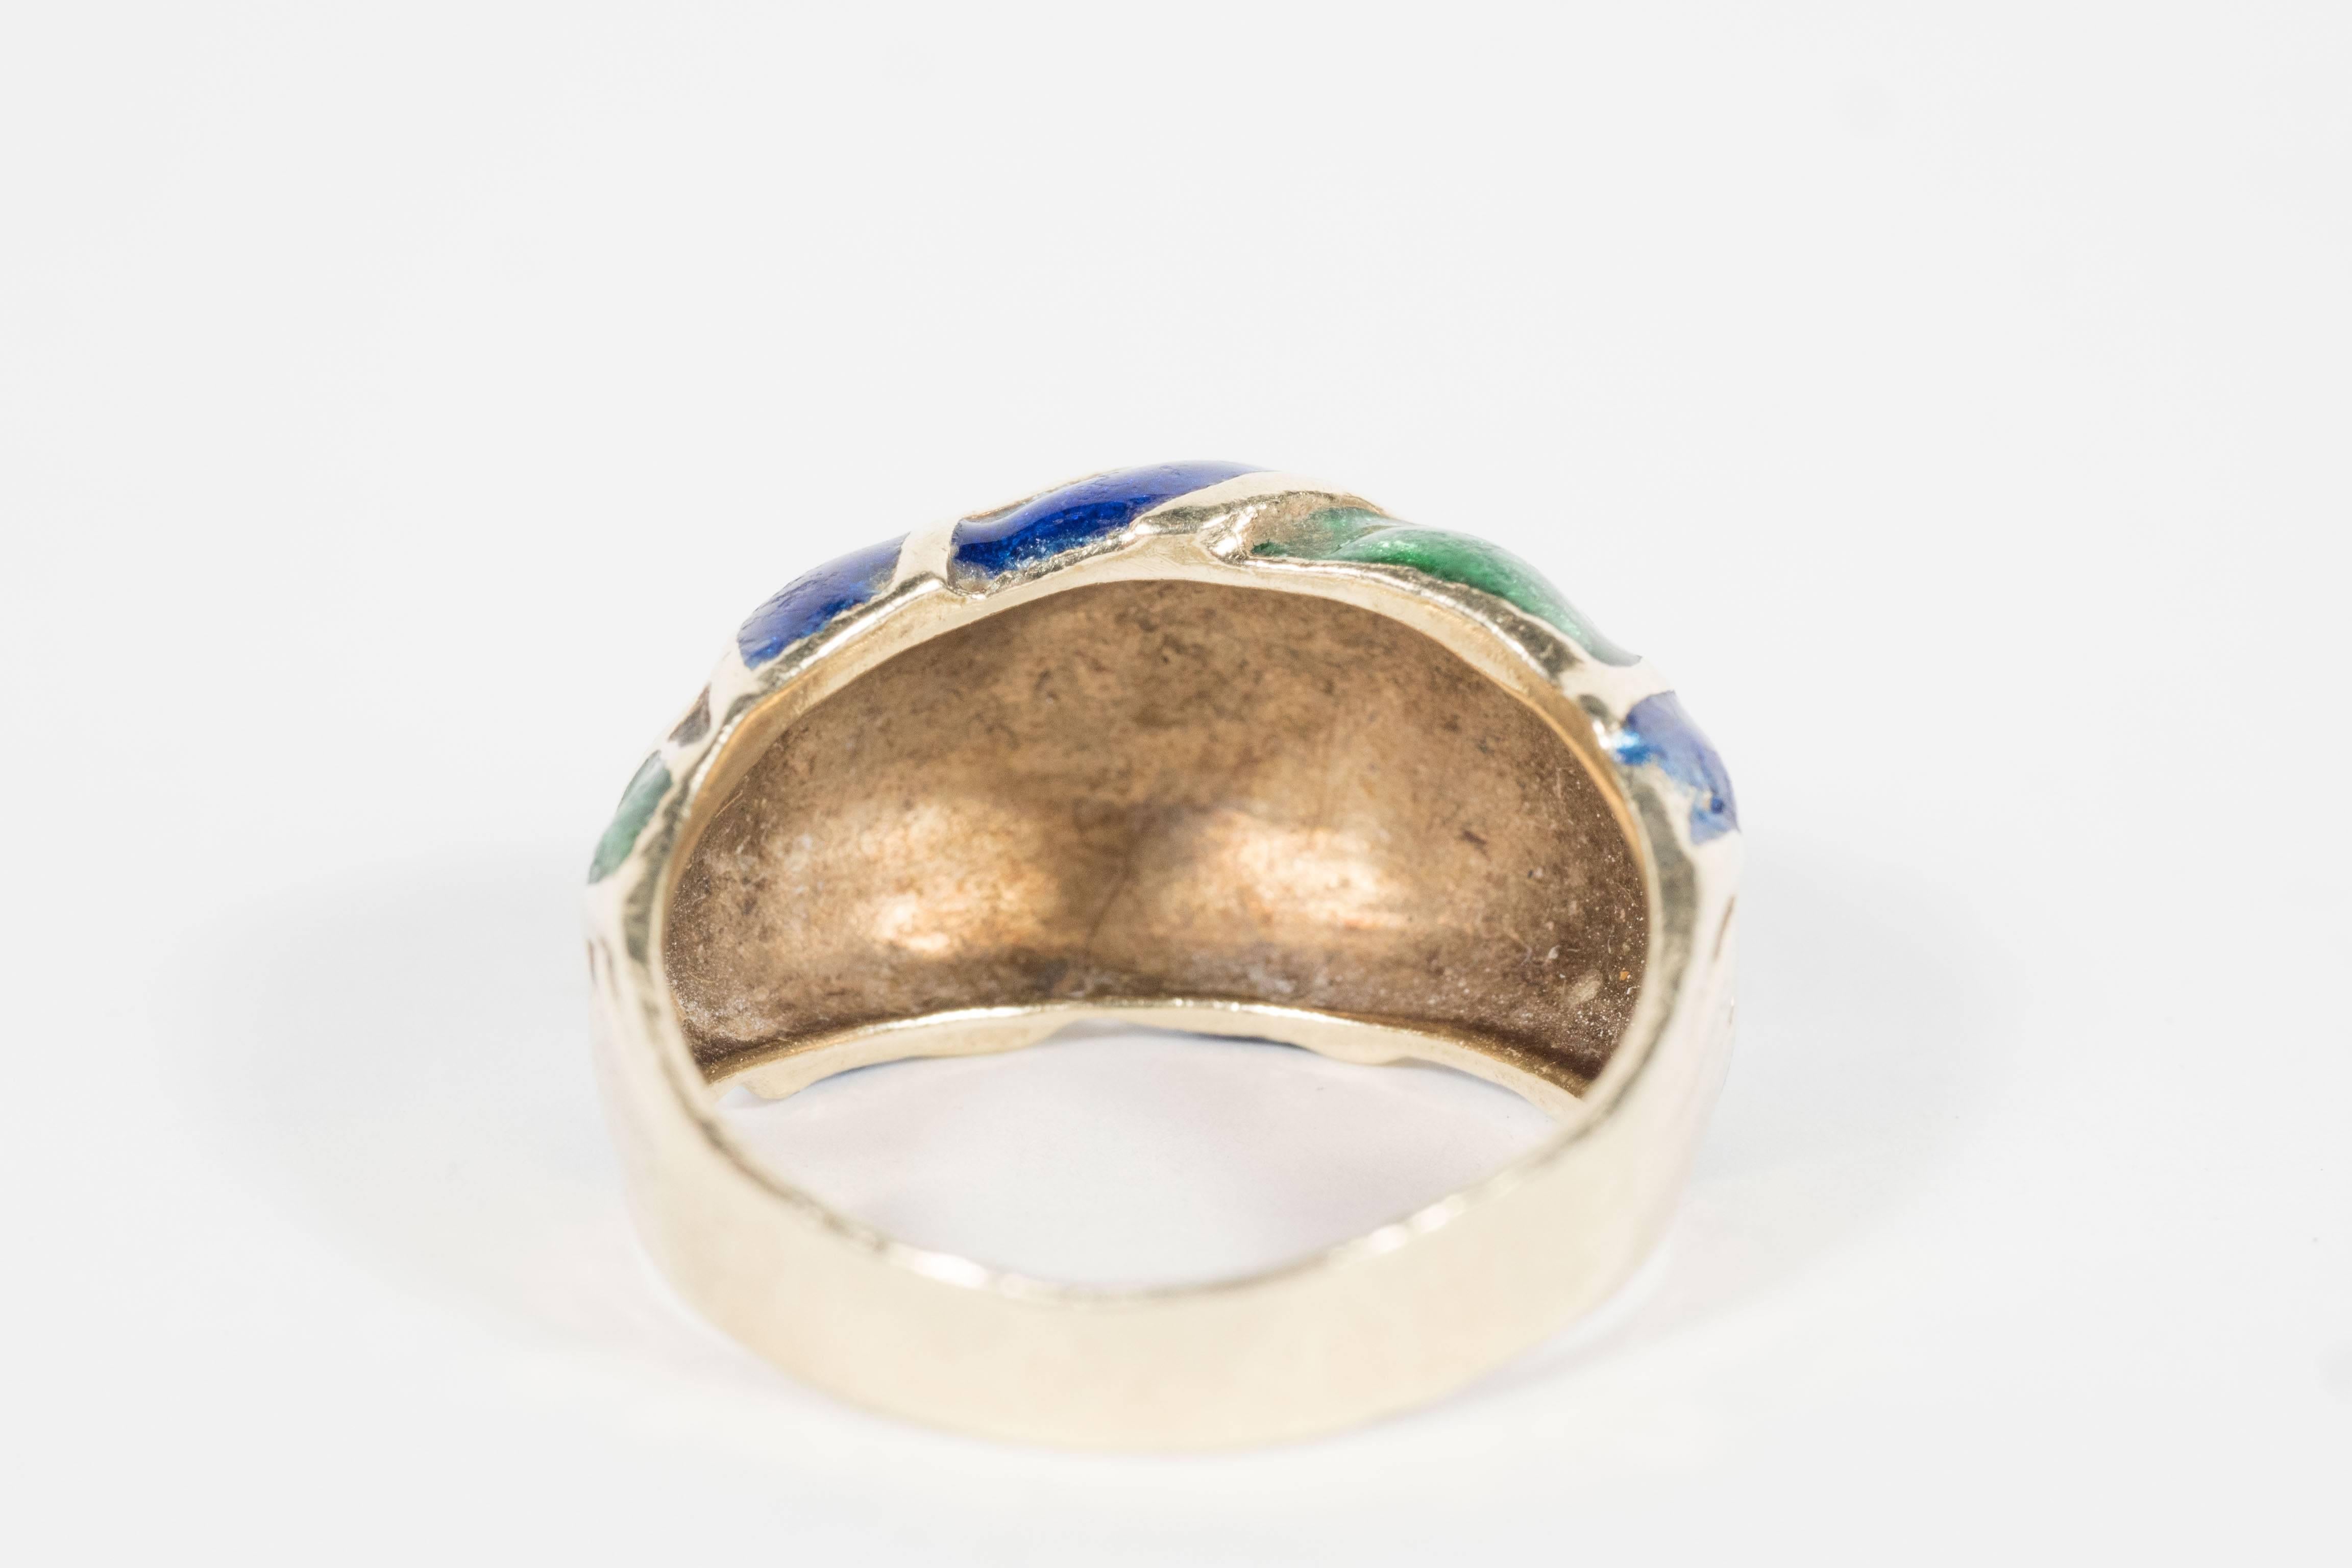 This beautiful ring features a braided knot design accented in blue and green enamel all set in 14k yellow gold.This ring is currently a size 7 but any jeweler can size to suit. It weighs 6 grams and is marked 14k as well.